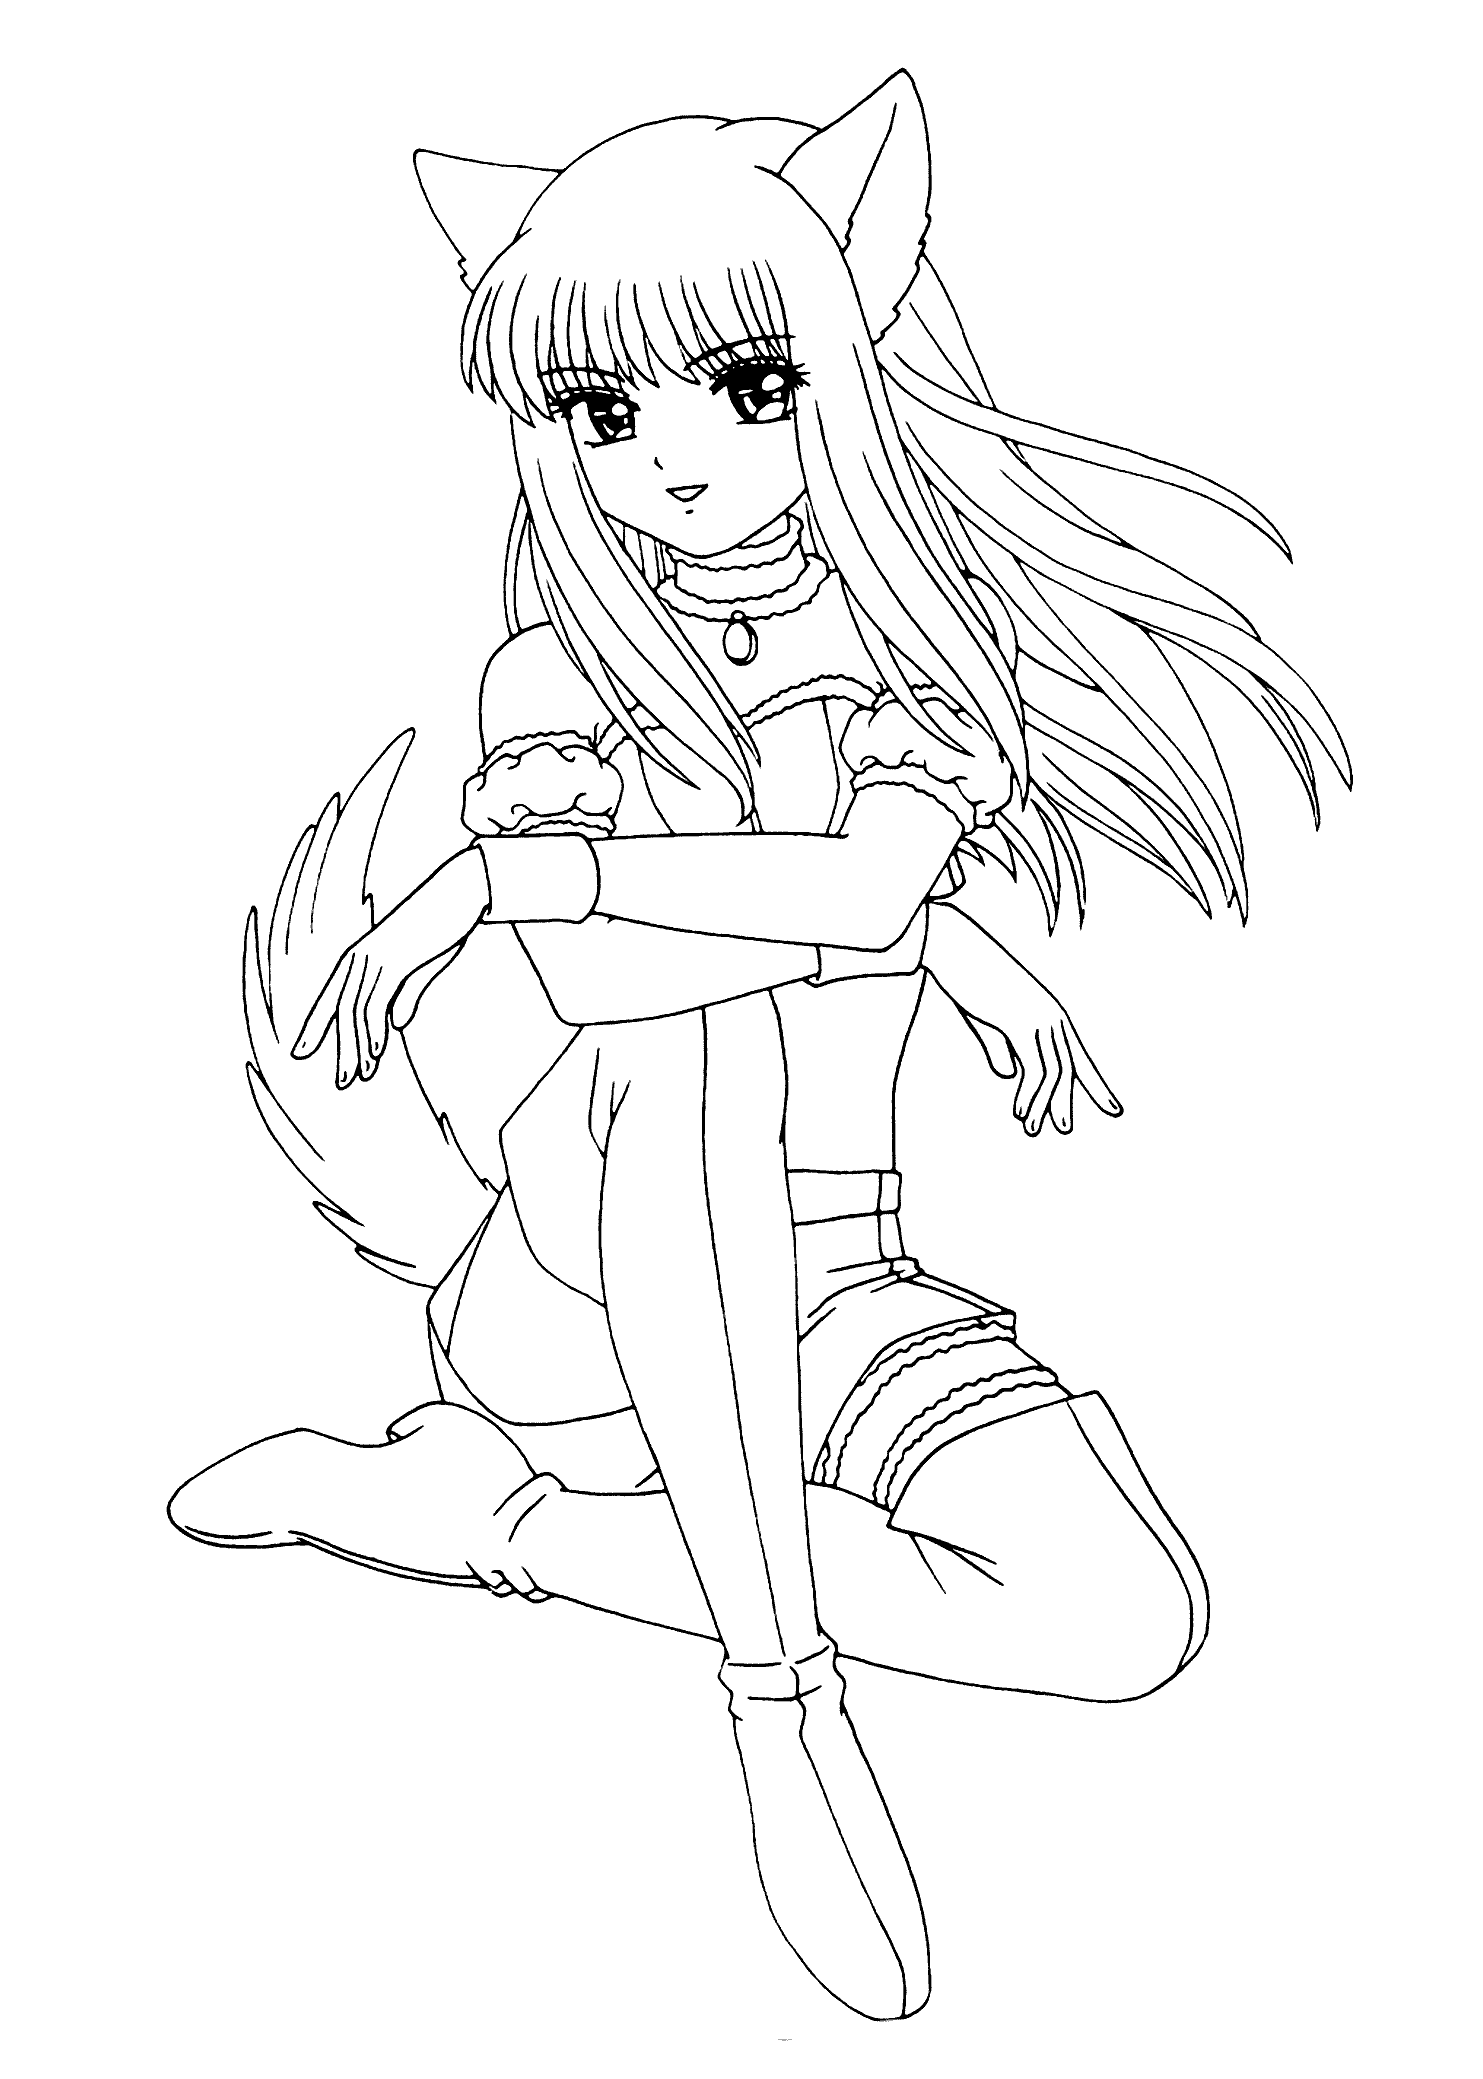 Free Anime Animals | Coloring Pages For Adults, Download Free Anime